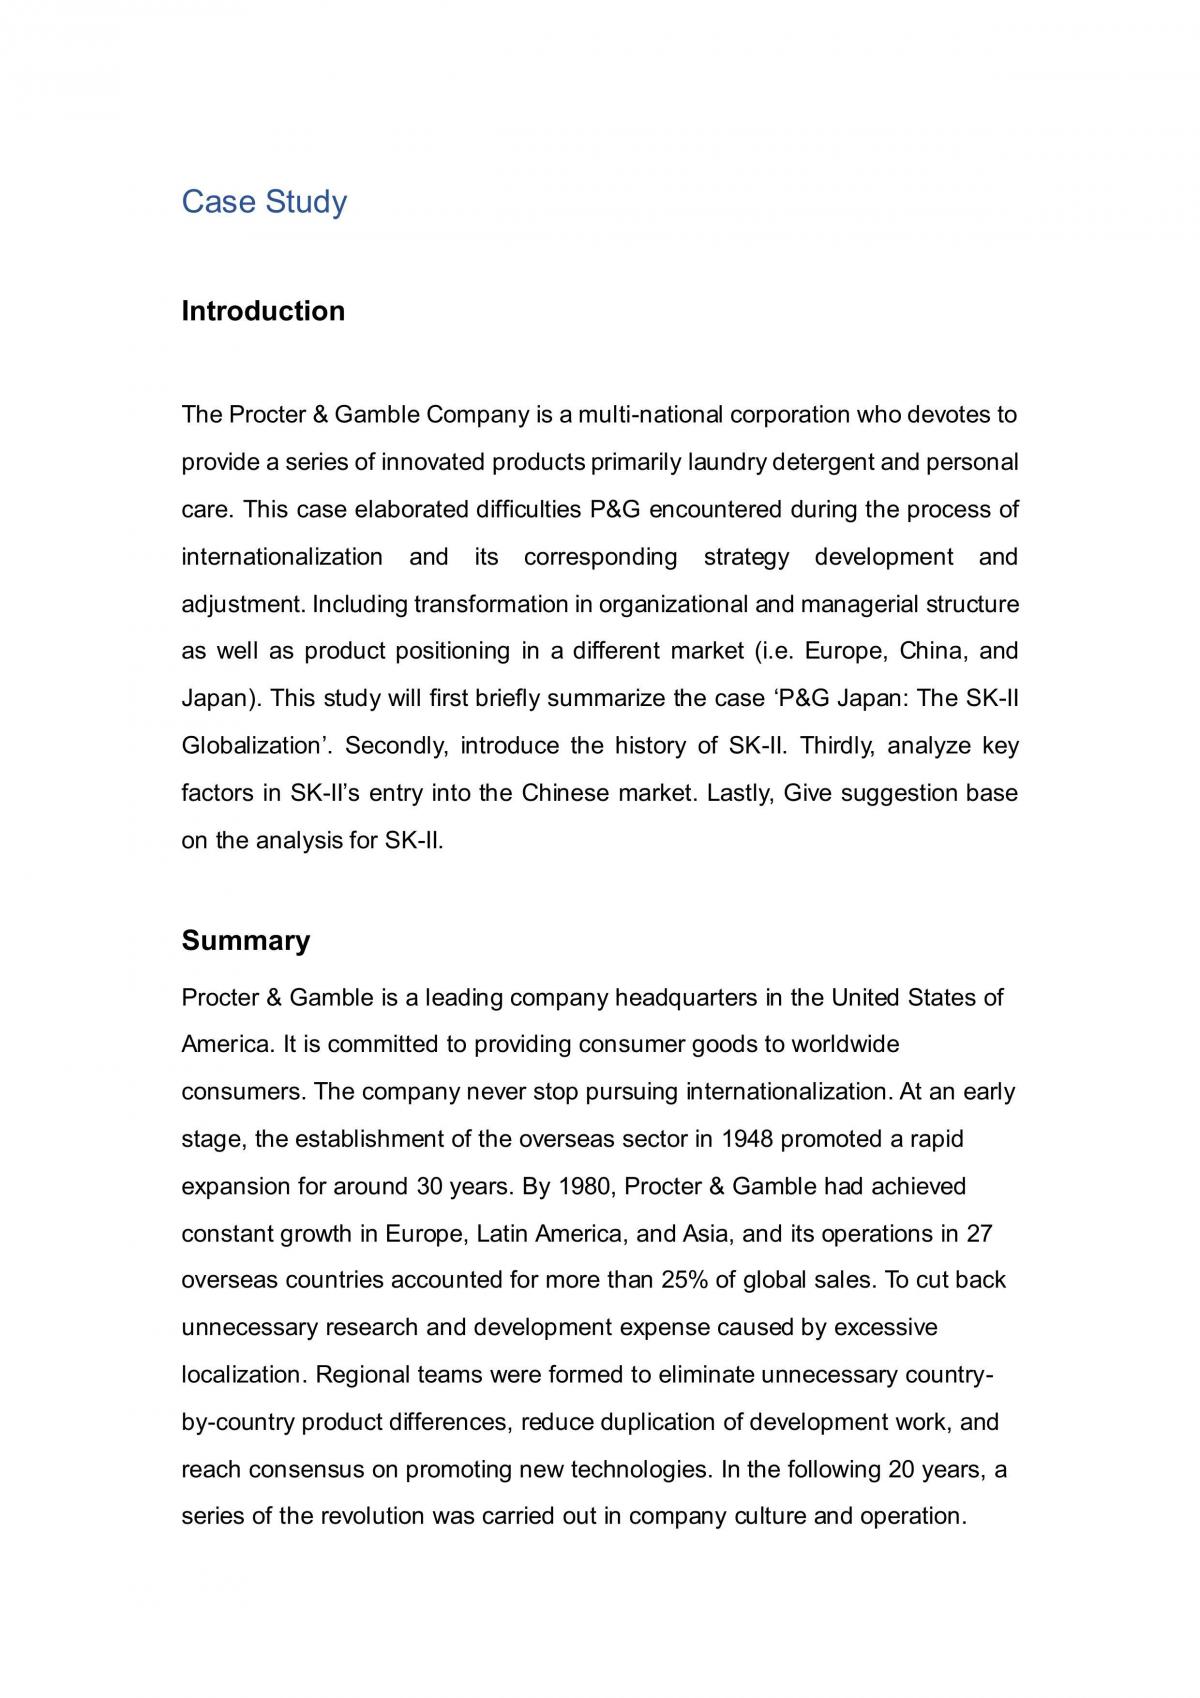 Case Study - Page 1